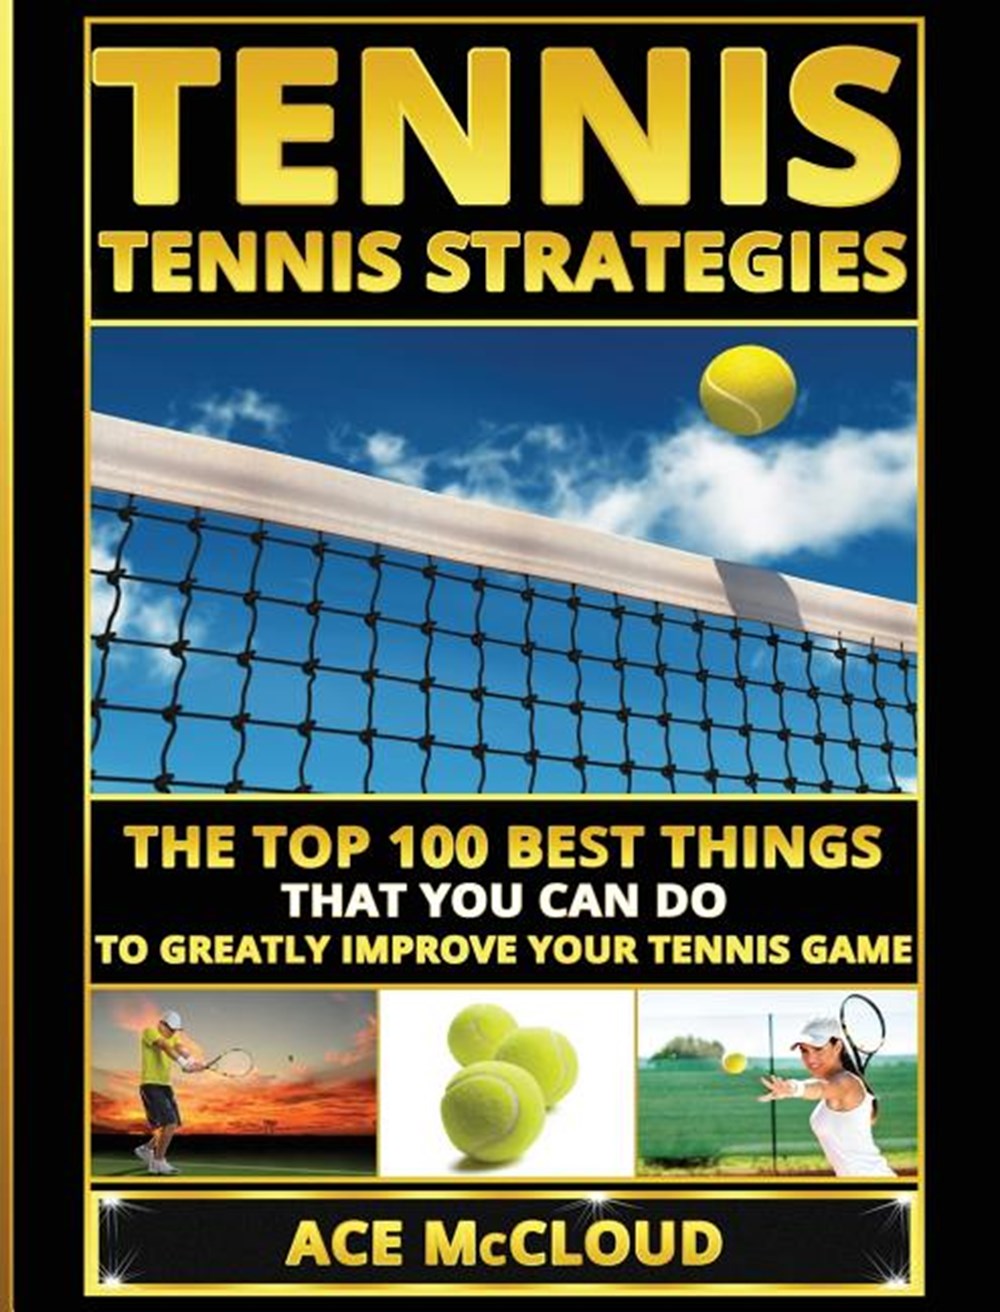 Tennis Tennis Strategies: The Top 100 Best Things That You Can Do To Greatly Improve Your Tennis Gam